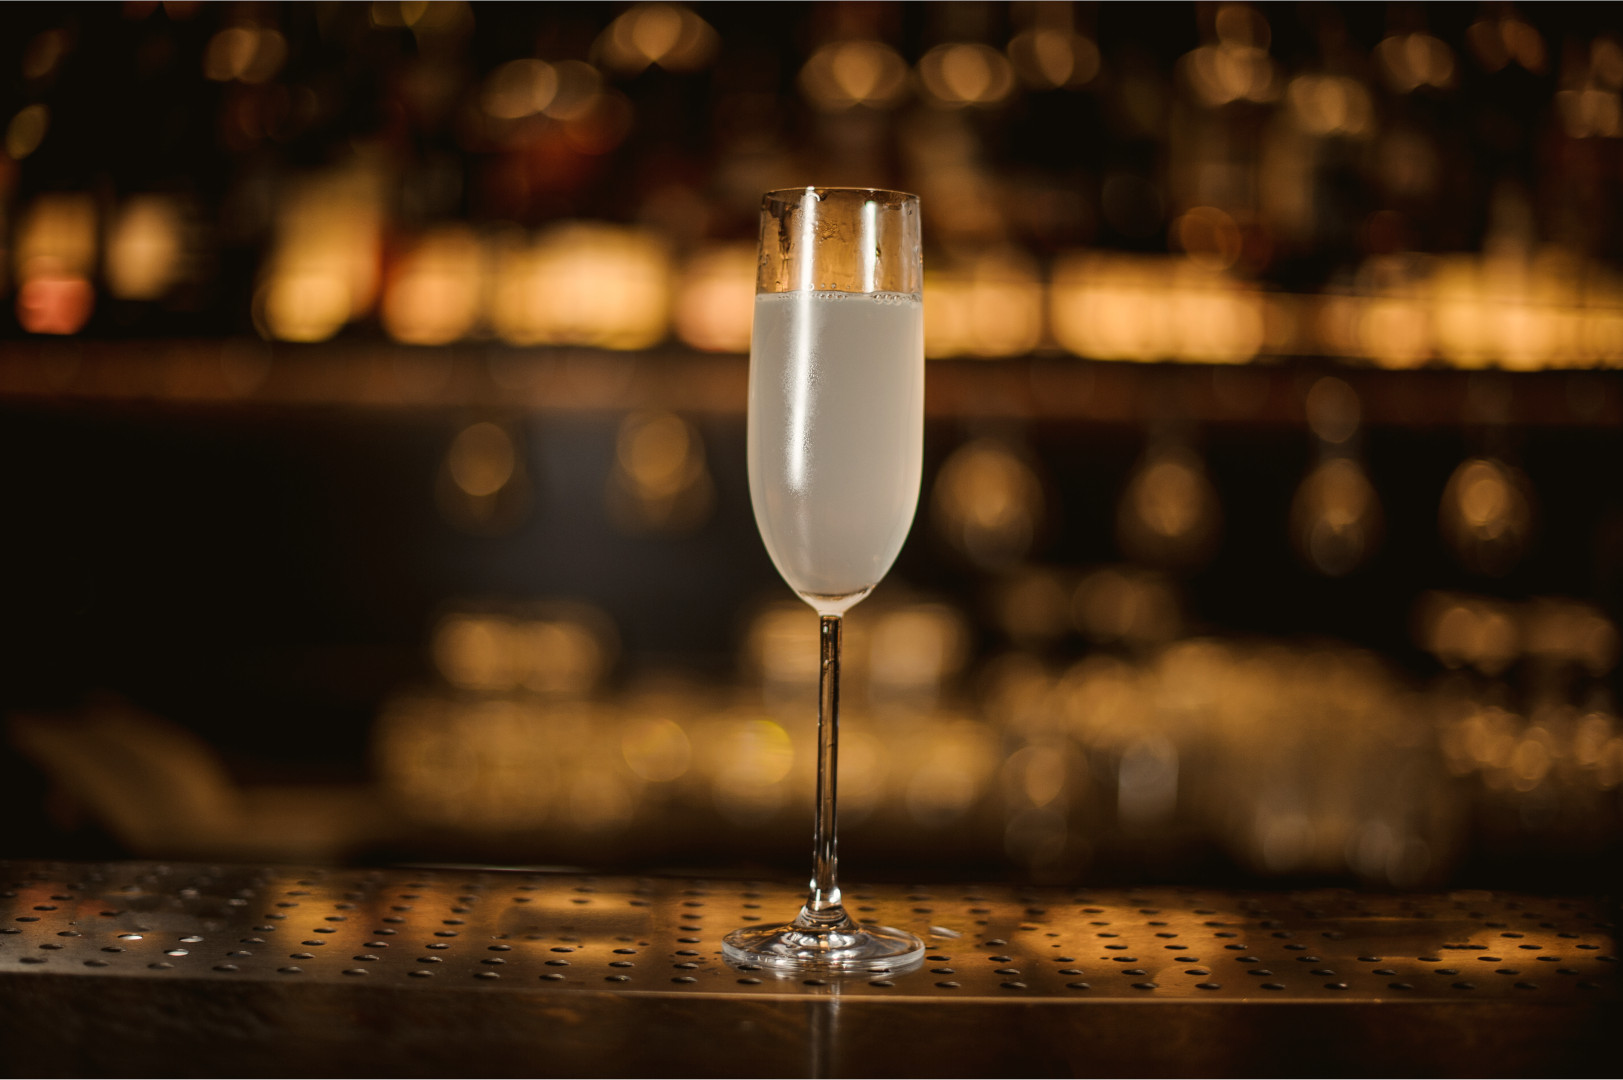 A French 75 sitting on a metal grated bar